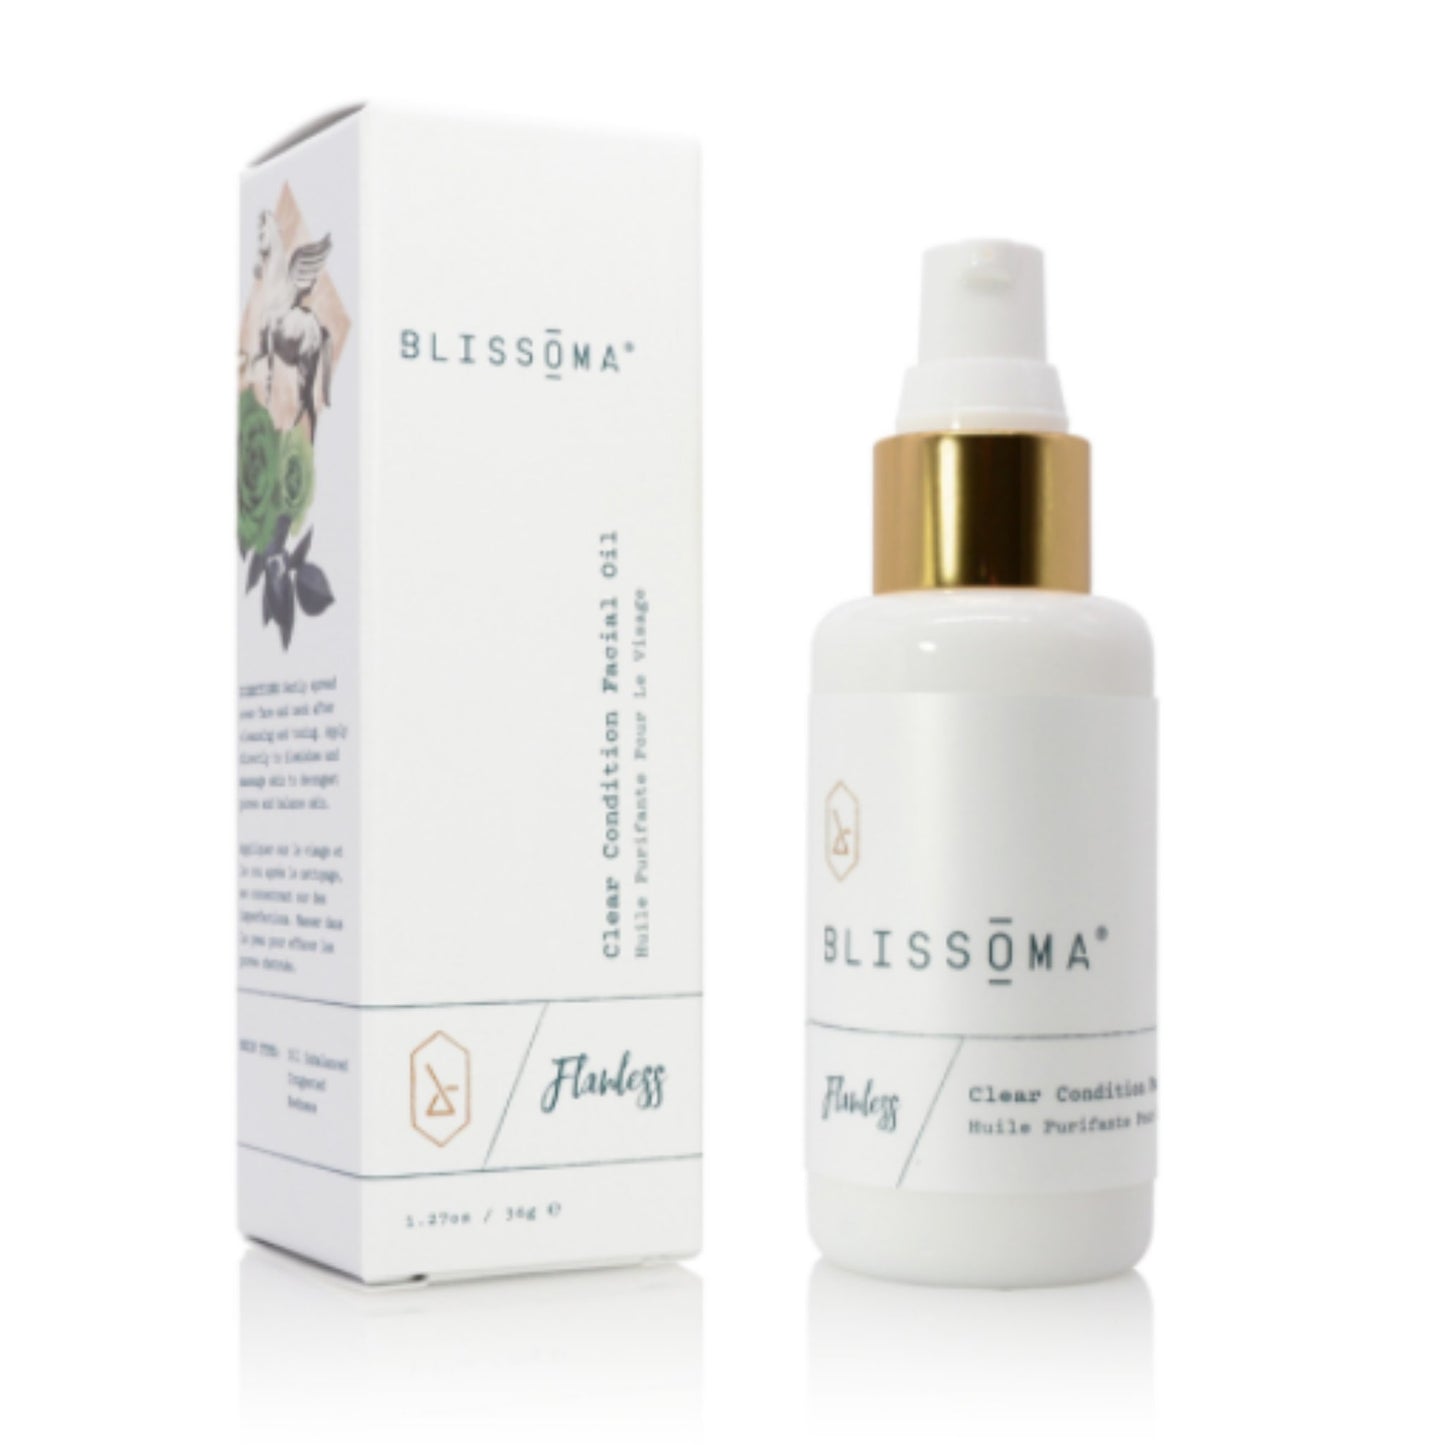 Blissoma - Blissoma Flawless Clear Condition Facial Oil - ORESTA clean beauty simplified